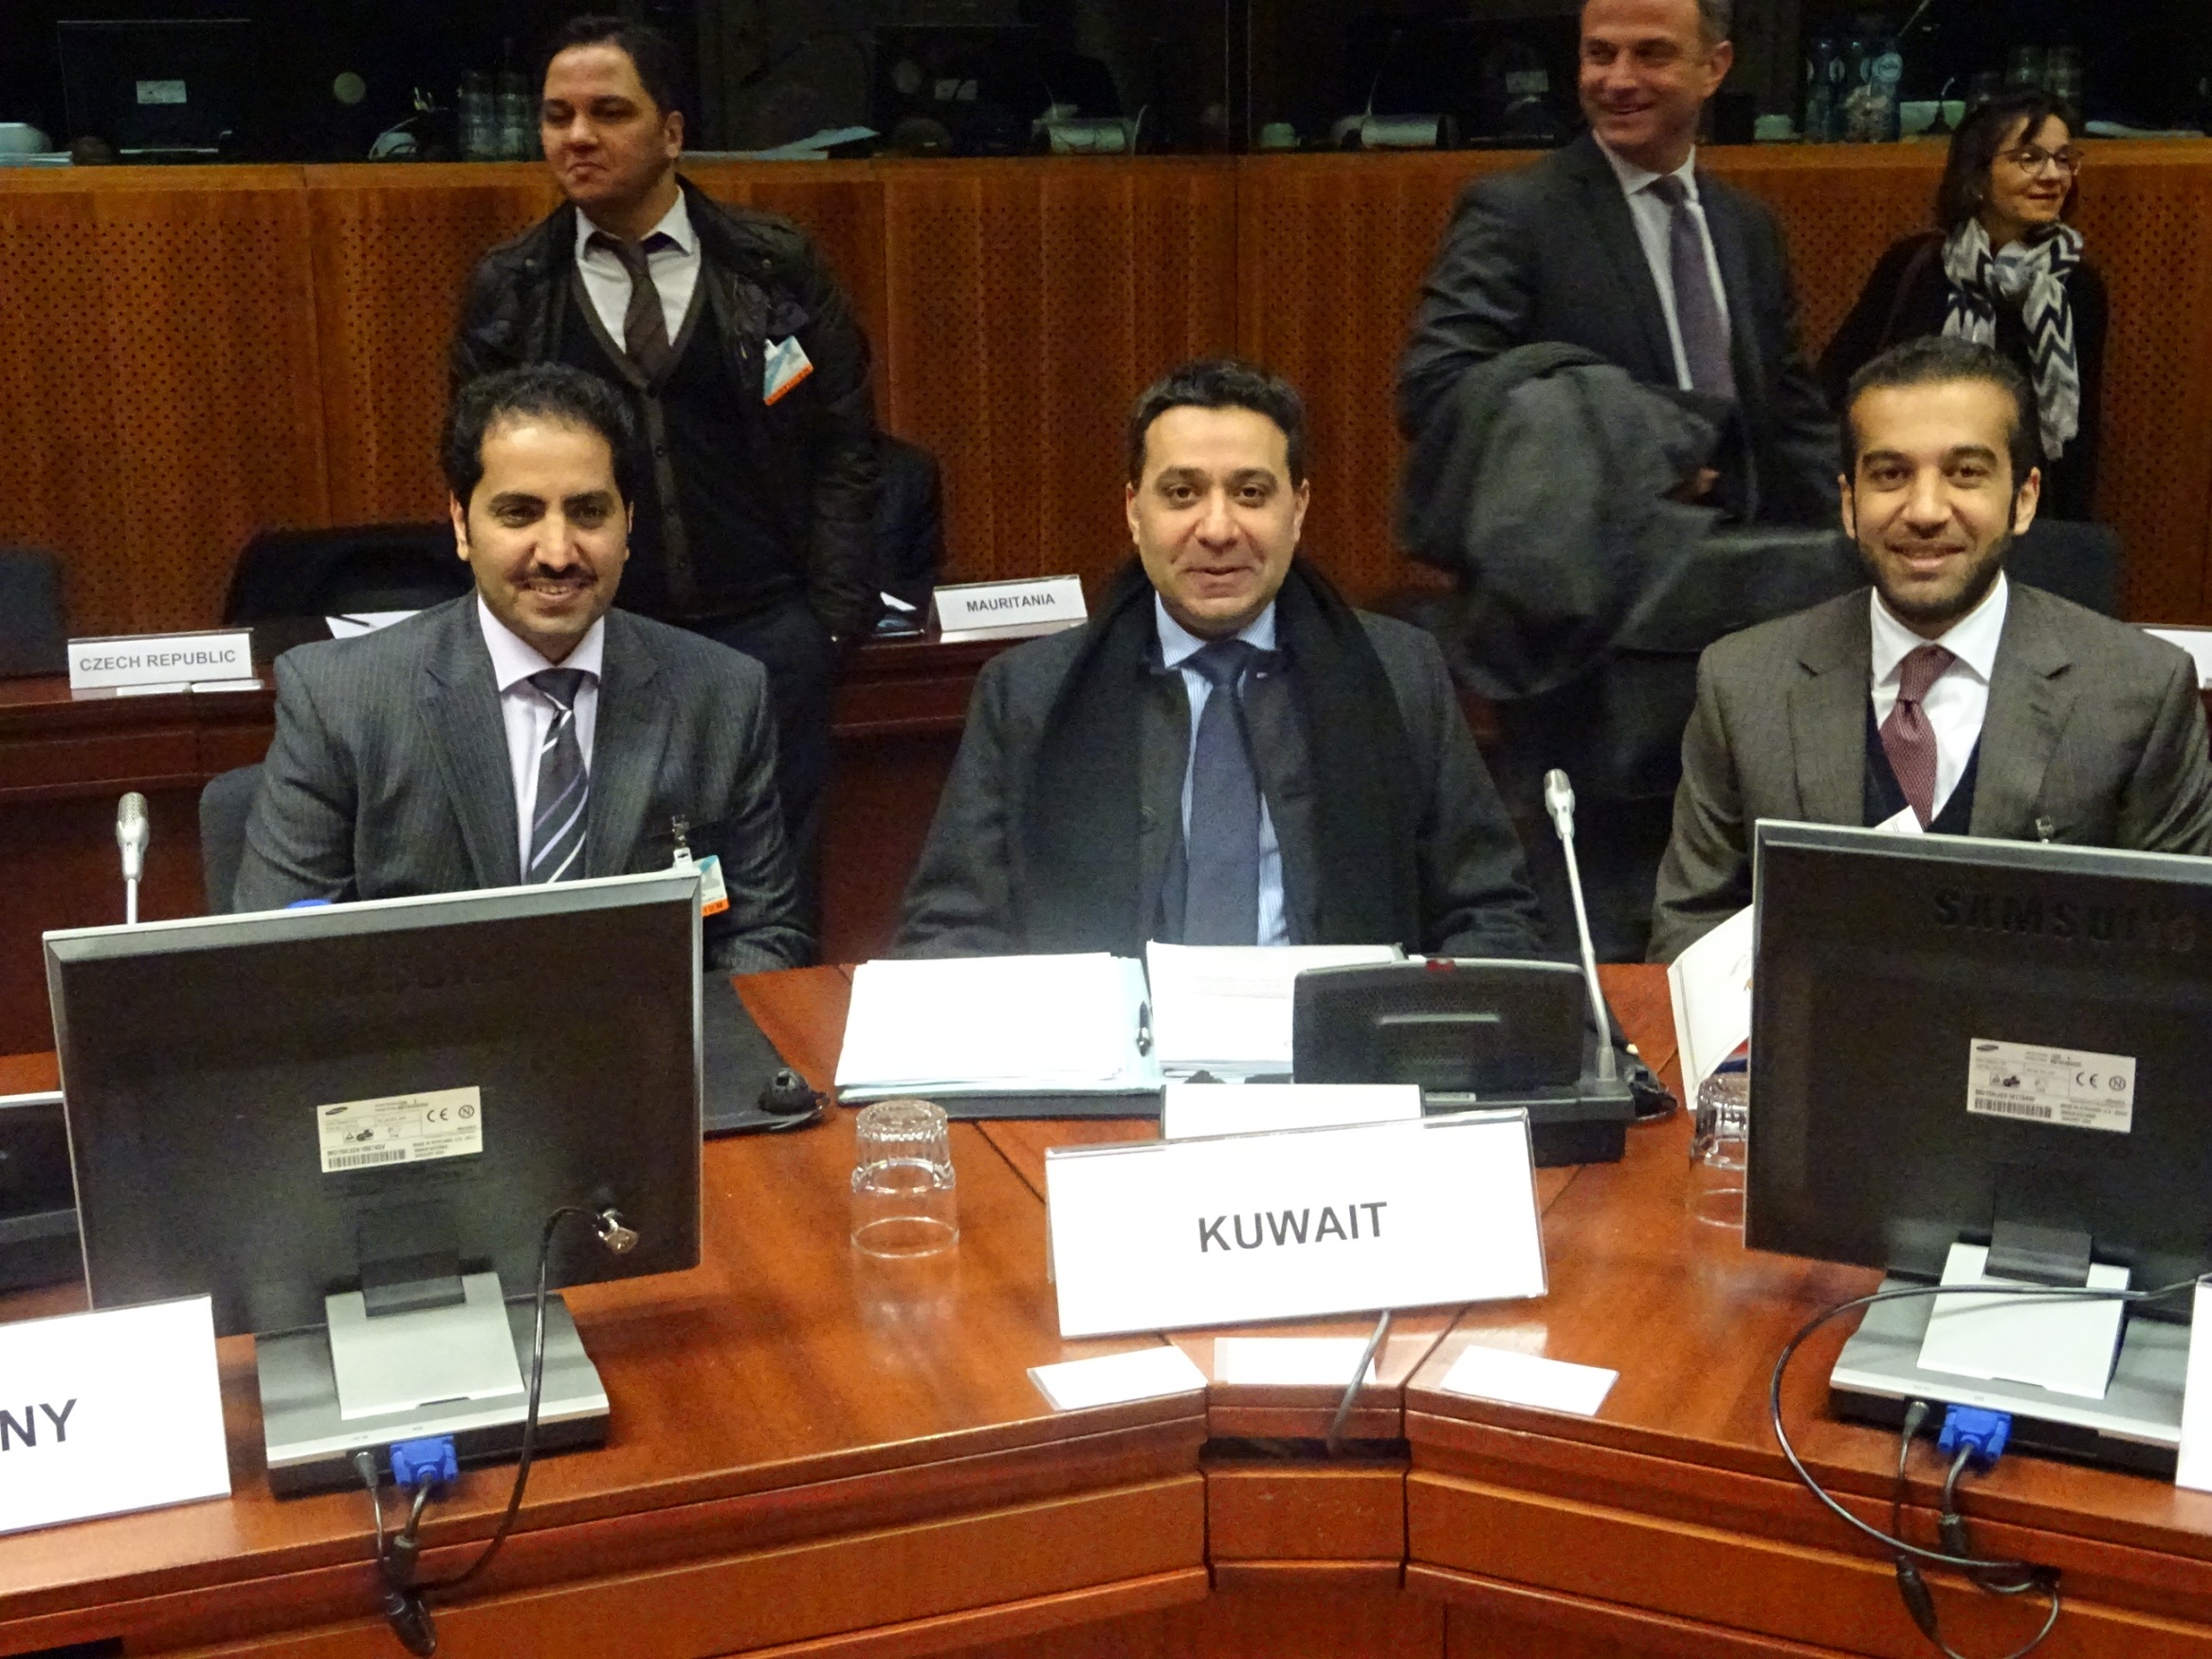 The Kuwaiti delegation at the meeting